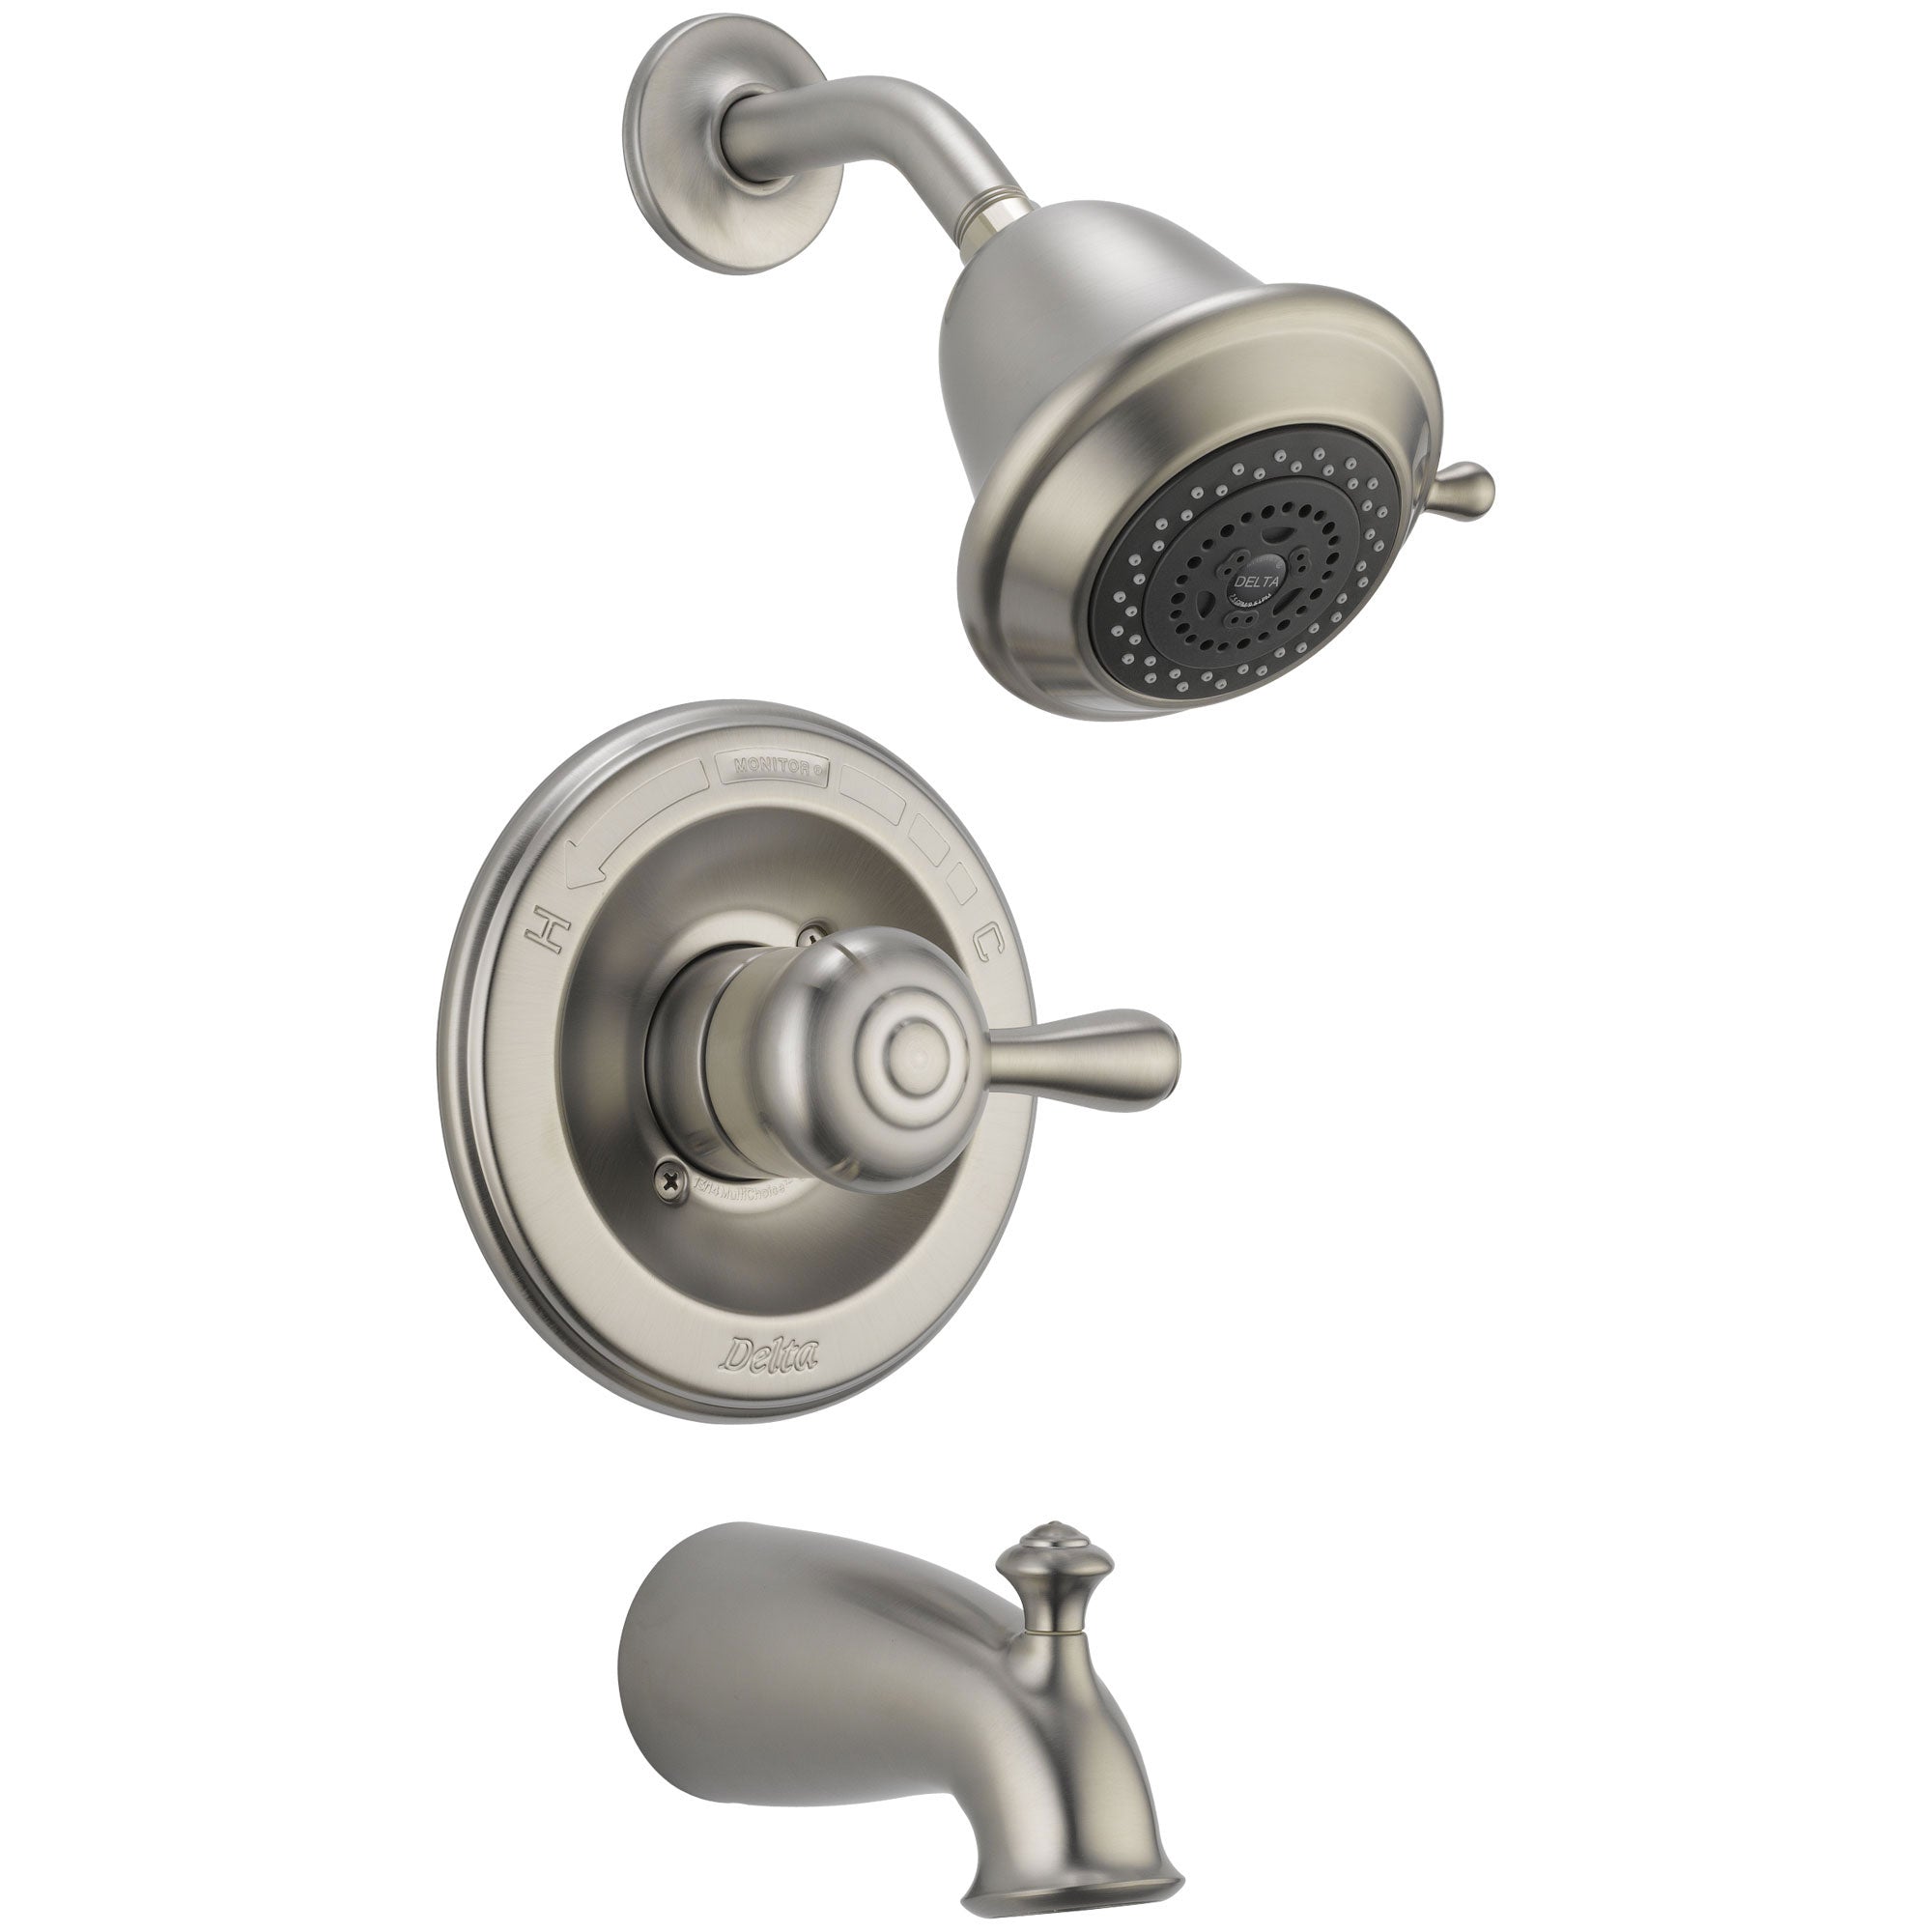 Delta Leland Monitor 14 Series Stainless Steel Finish Single Lever Handle Tub and Shower Faucet Combo INCLUDES Rough-in Valve D1320V